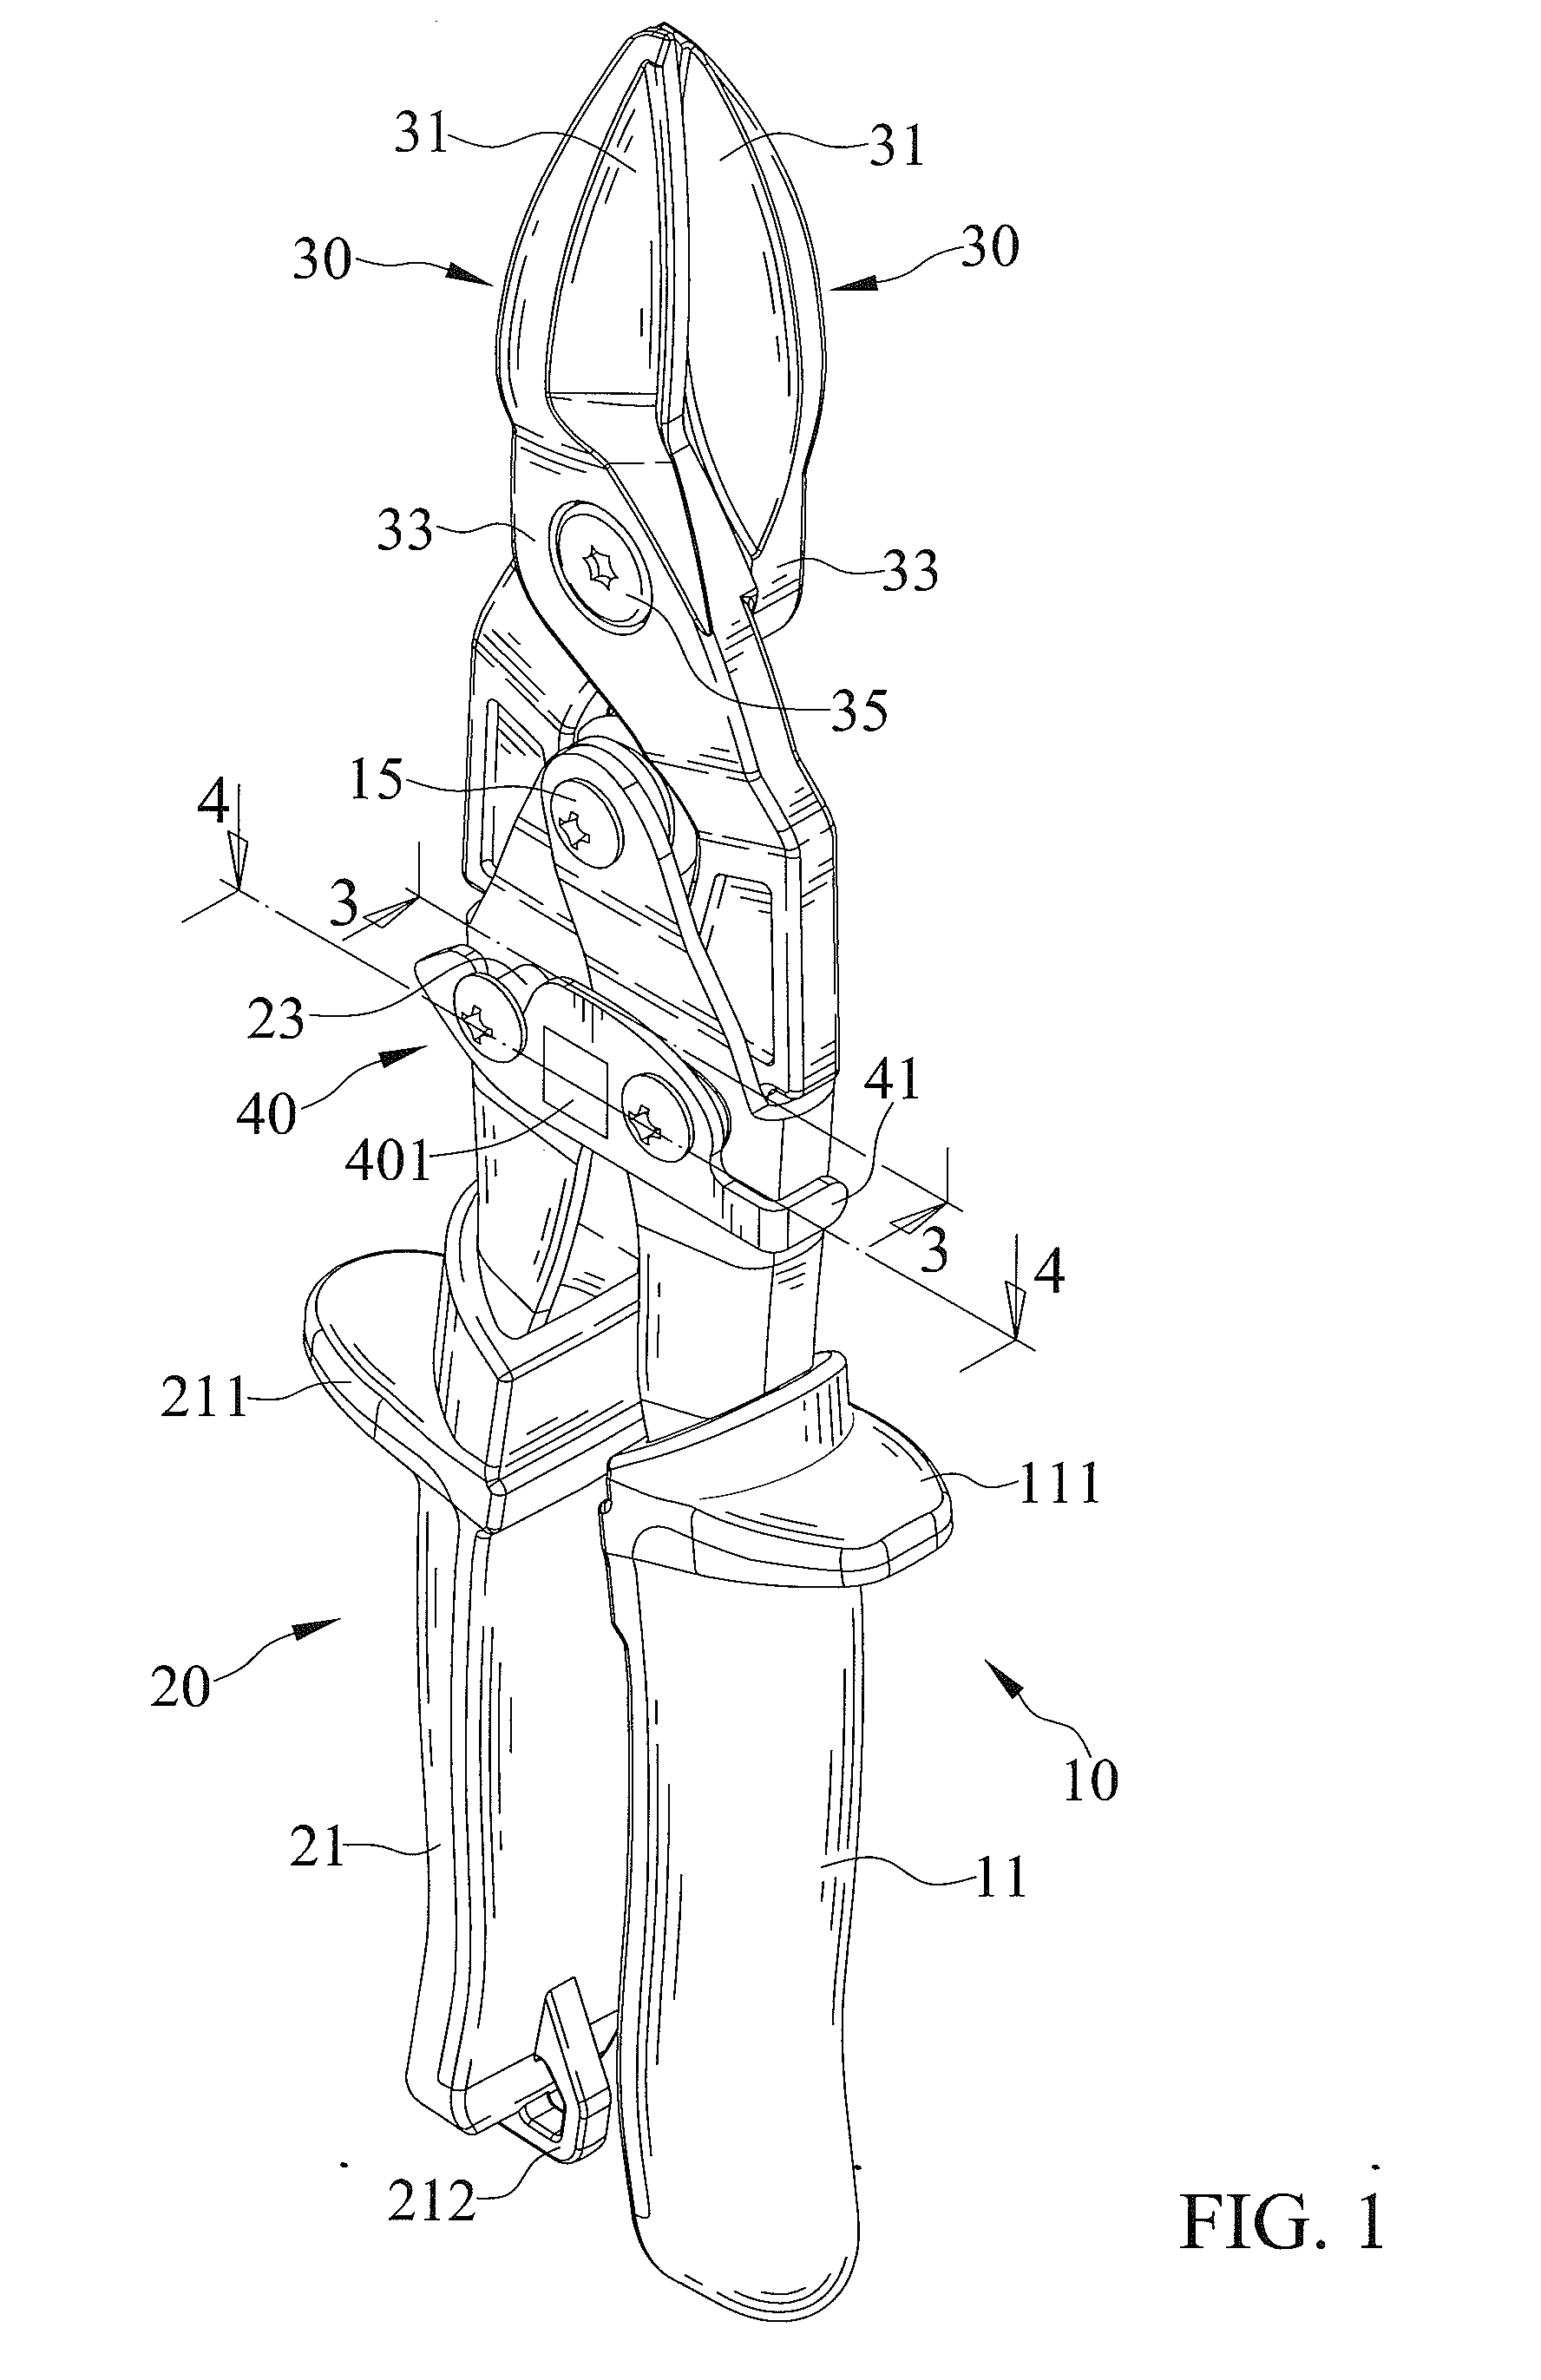 Snips with One-Hand-Operable Lock Device